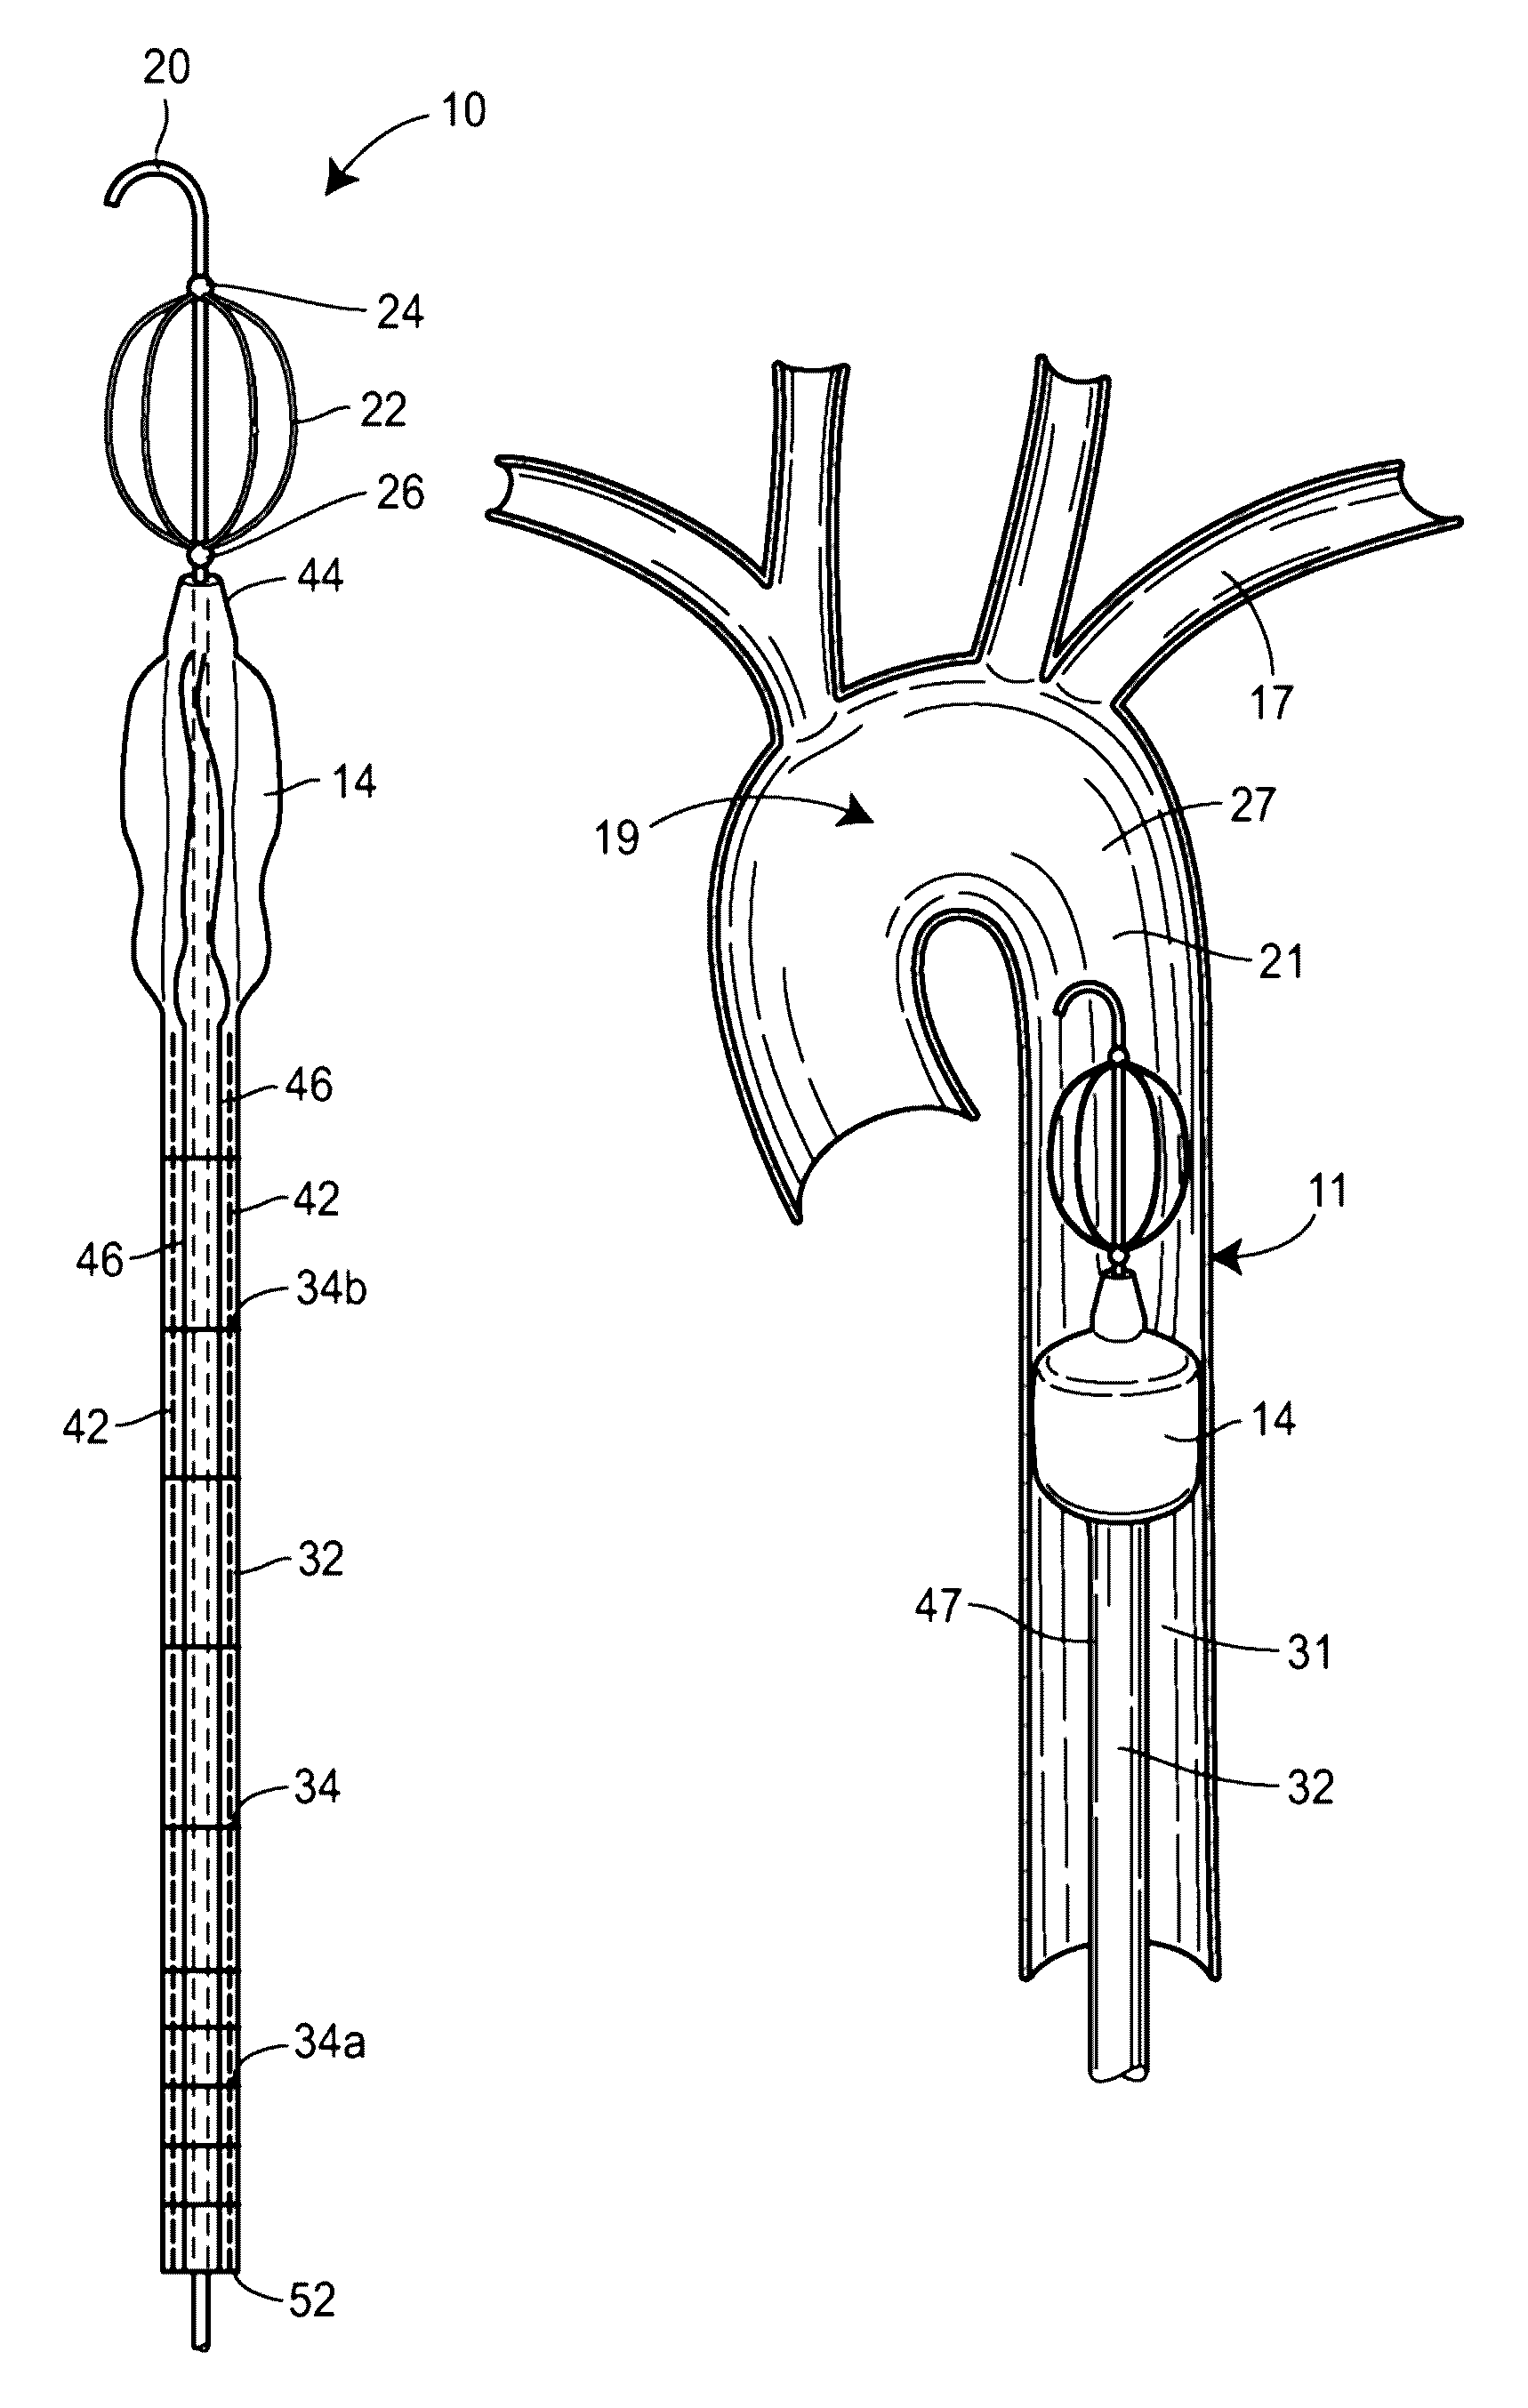 Fluoroscopy-independent balloon guided occlusion catheter and methods